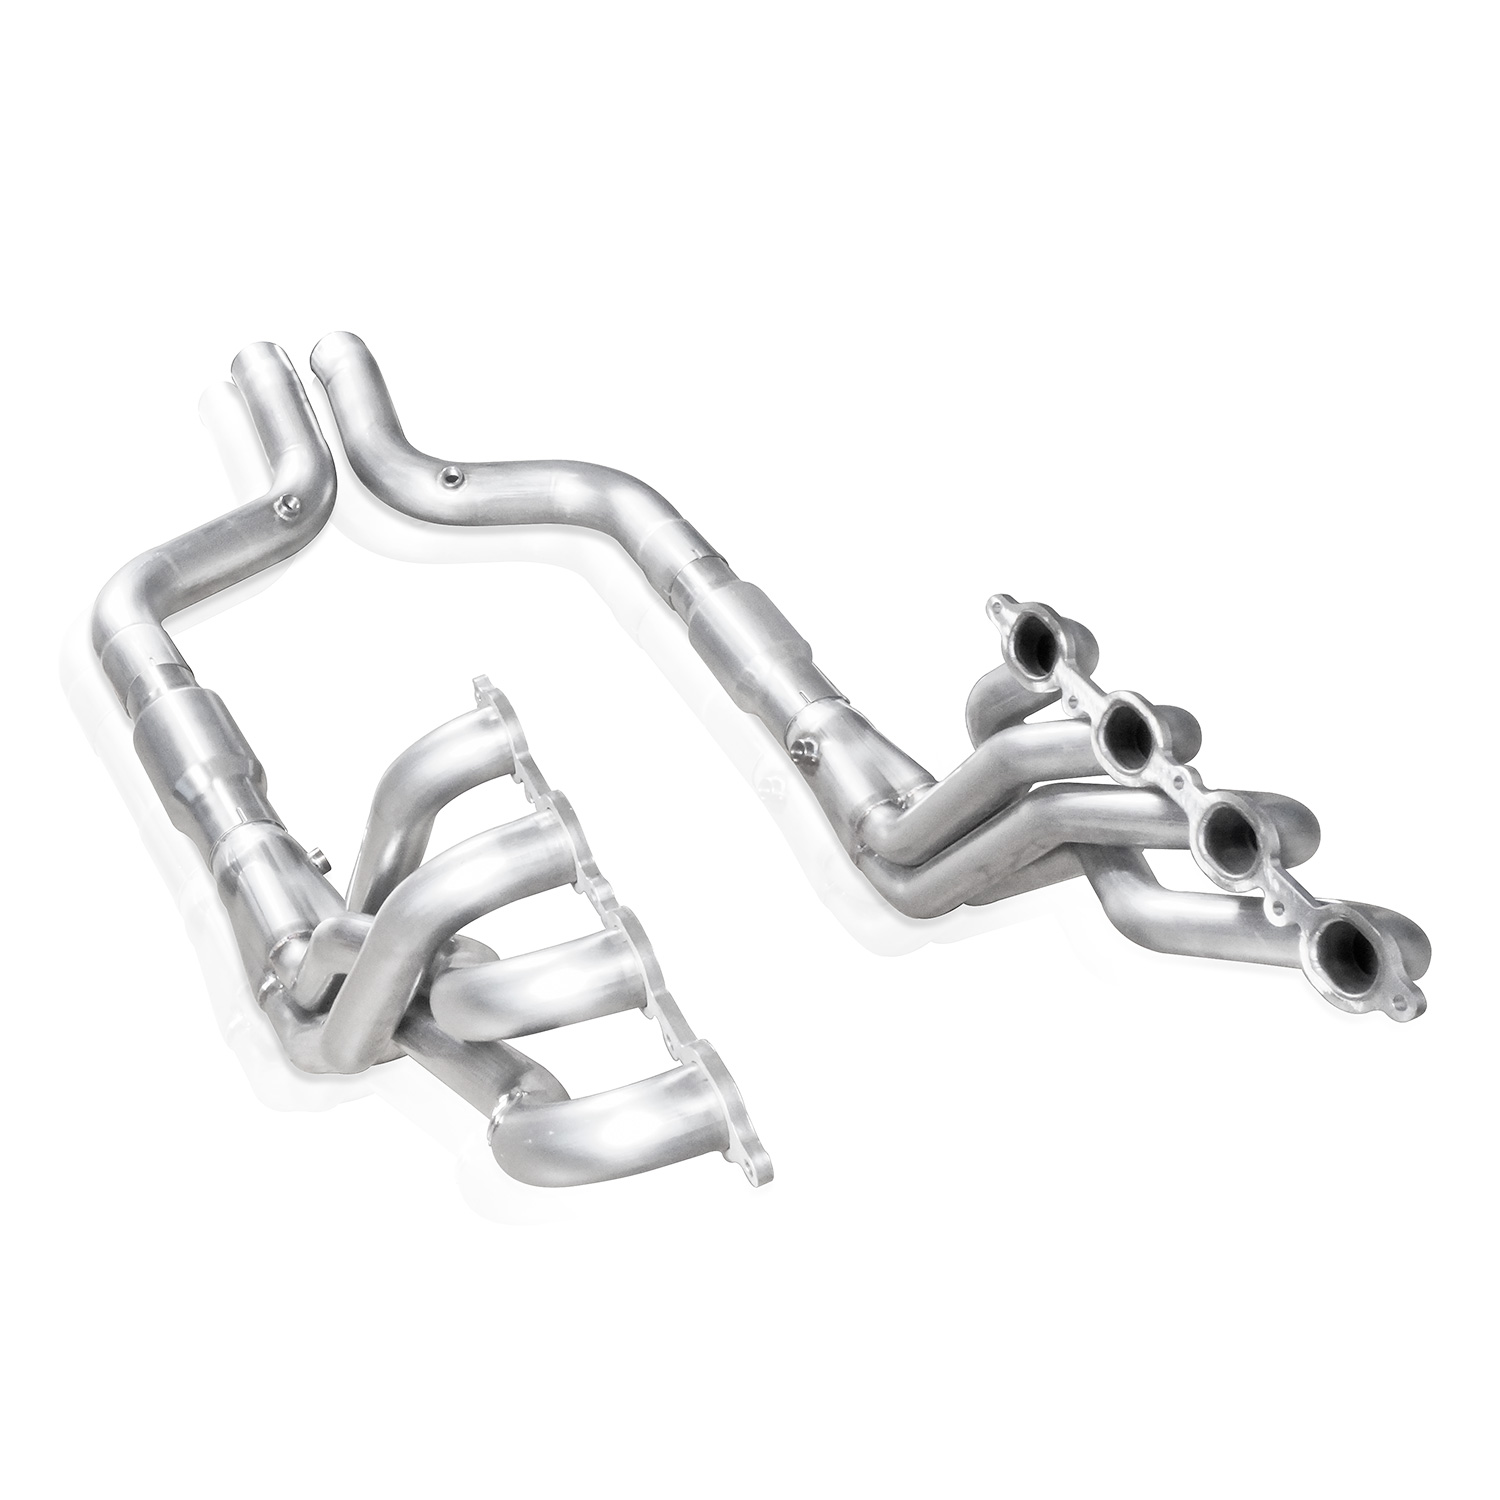 2016-2019 Cadillac CTS-V Sedan LT4 6.2L SW Headers 2" Primaries With High Flow Cats Performance Connect